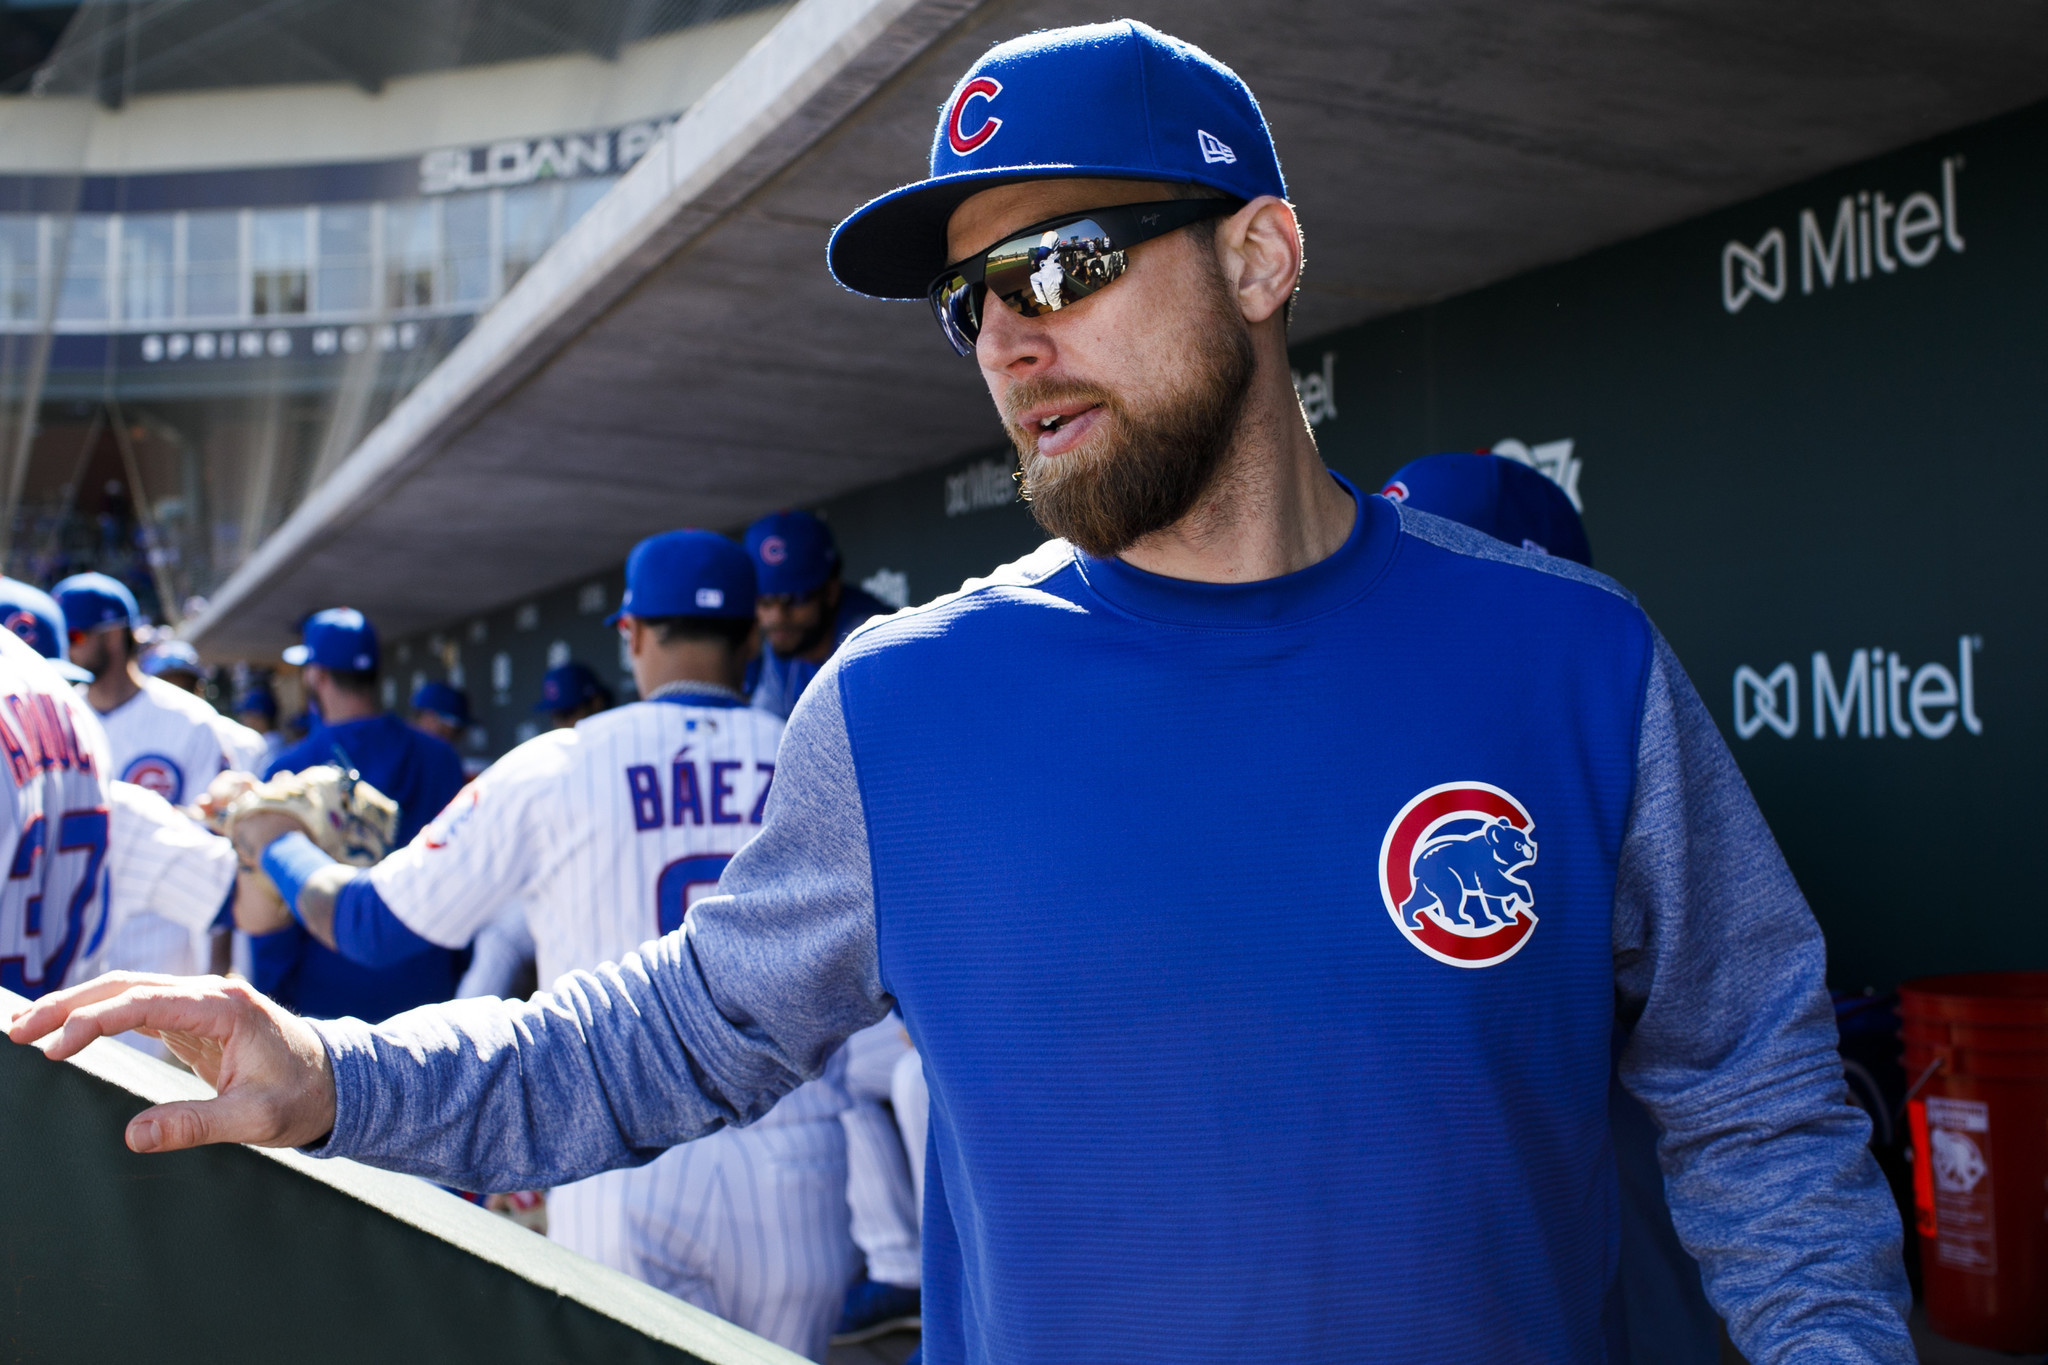 Ben Zobrist lawsuit alleges pastor had an affair with his wife